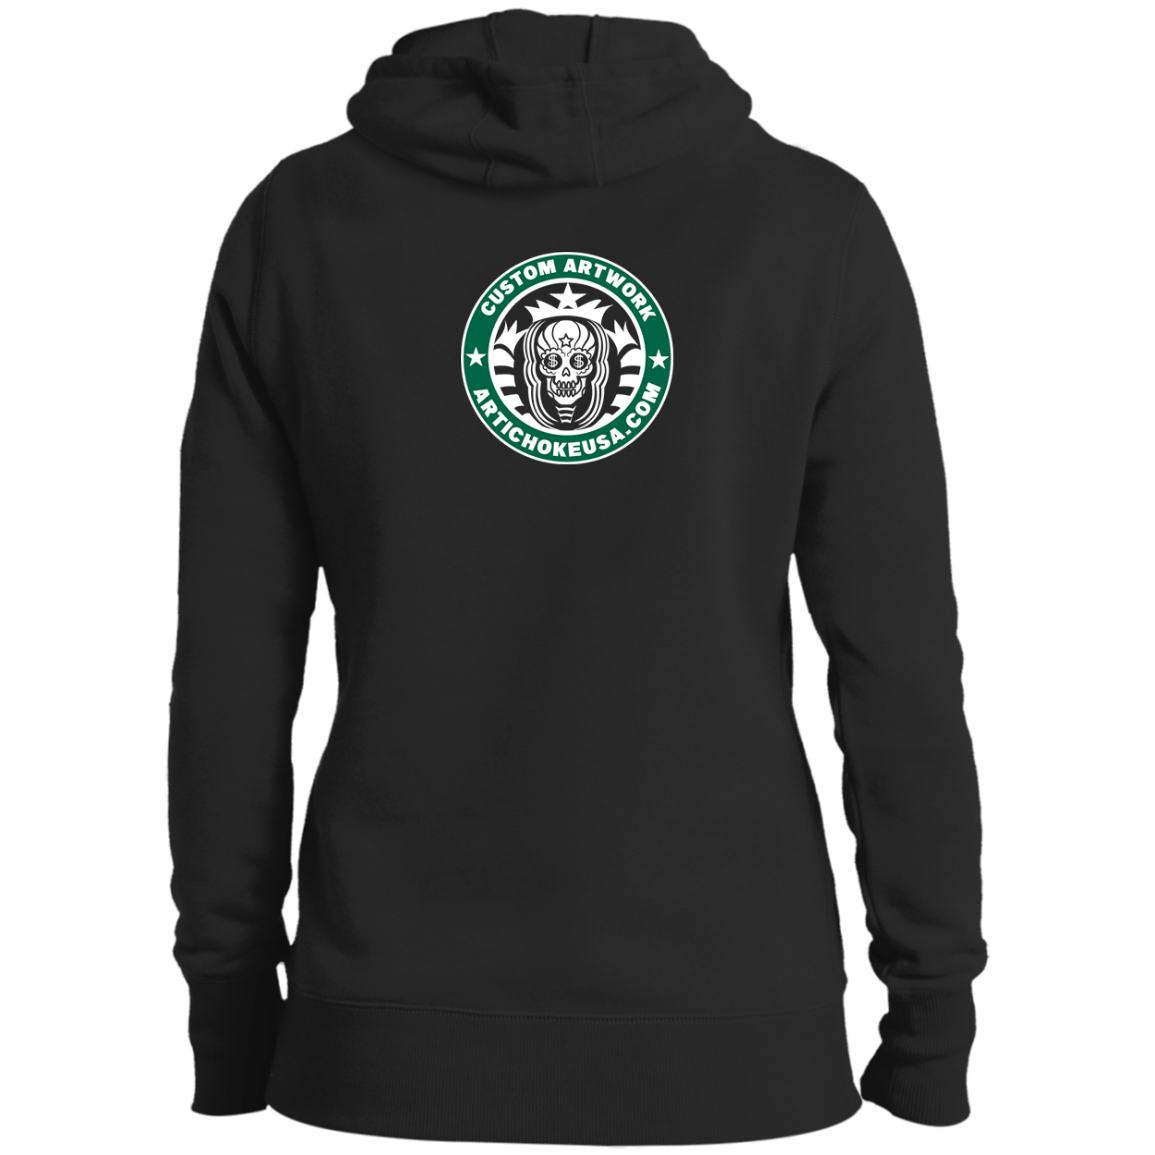 ArtichokeUSA Custom Design. Money Can't Buy Happiness But It Can Buy You Coffee. Ladies' Pullover Hooded Sweatshirt